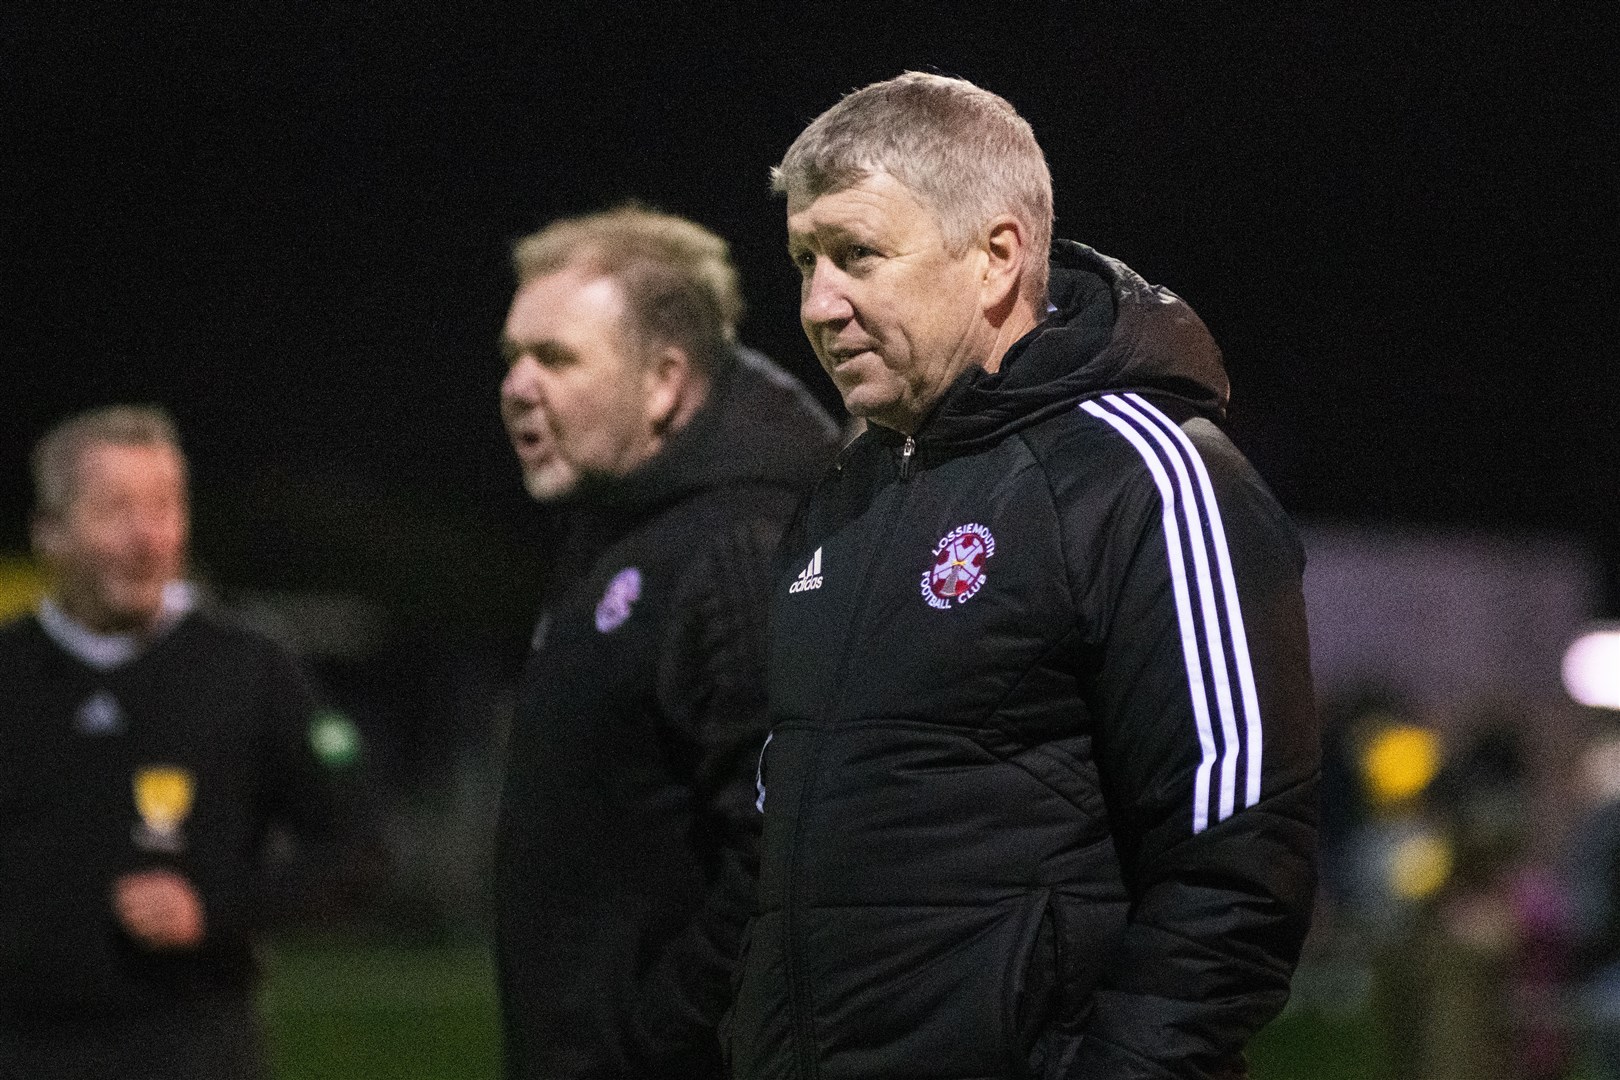 Lossiemouth interim manager Ian Campbell. Picture: Daniel Forsyth